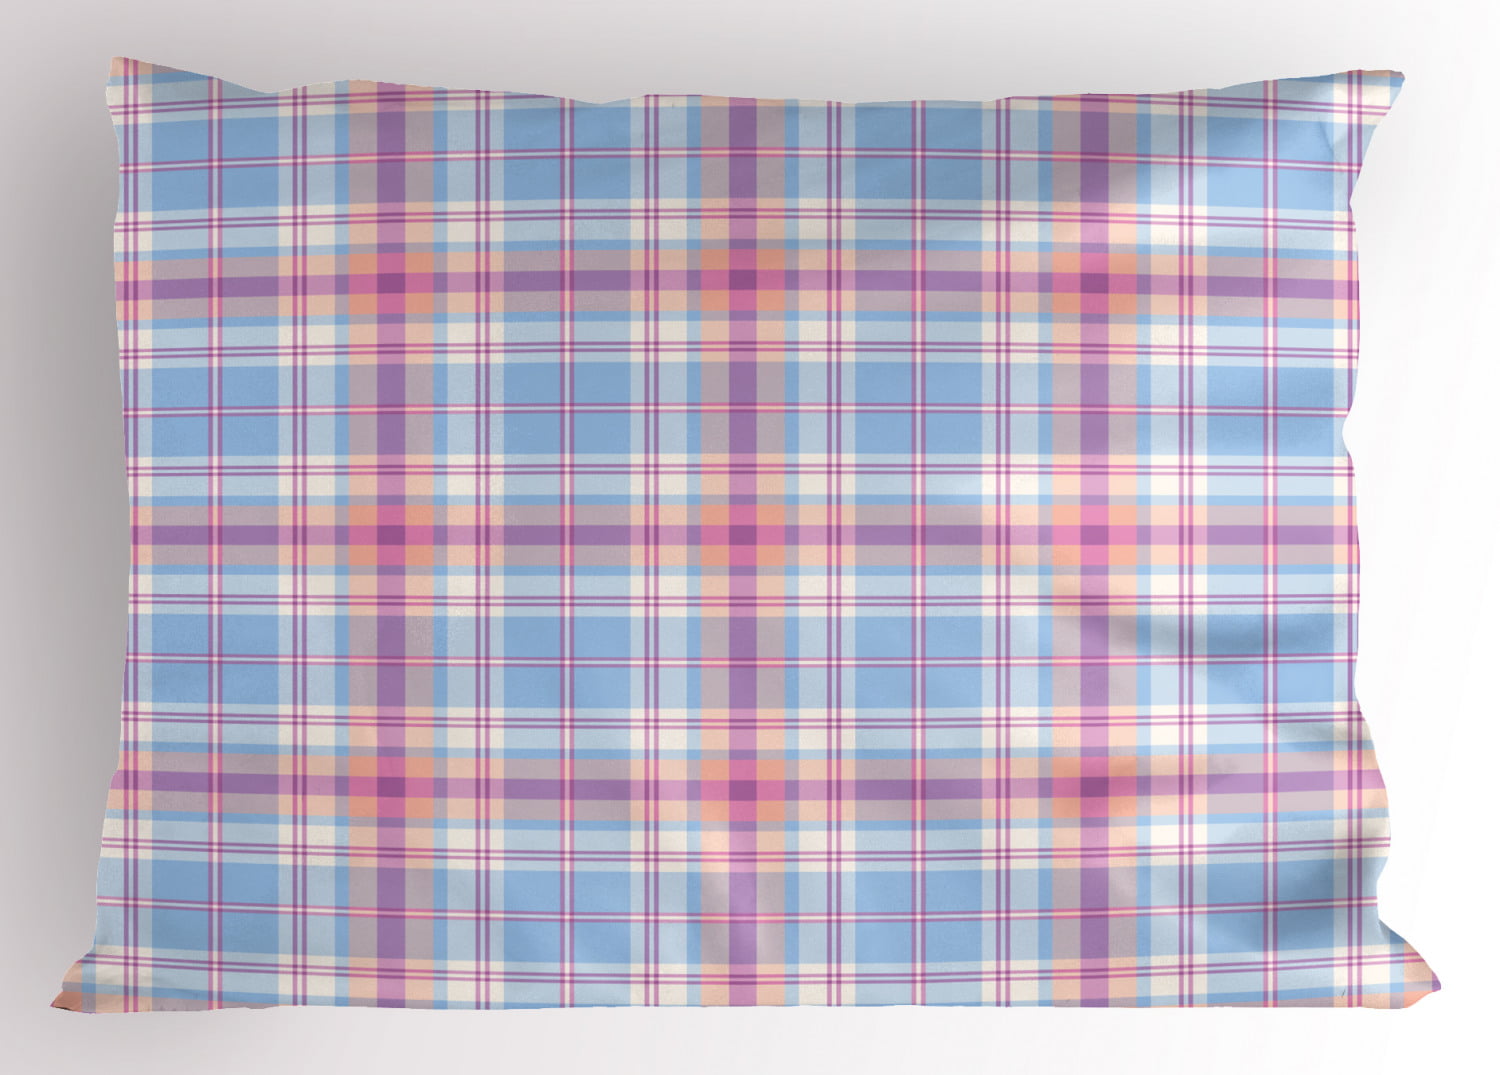 100% Cotton Sateen 30in x 30in Flange Sham Roostery Pillow Sham Madras Plaid Preppy Squares Spring Pastel Easter Print